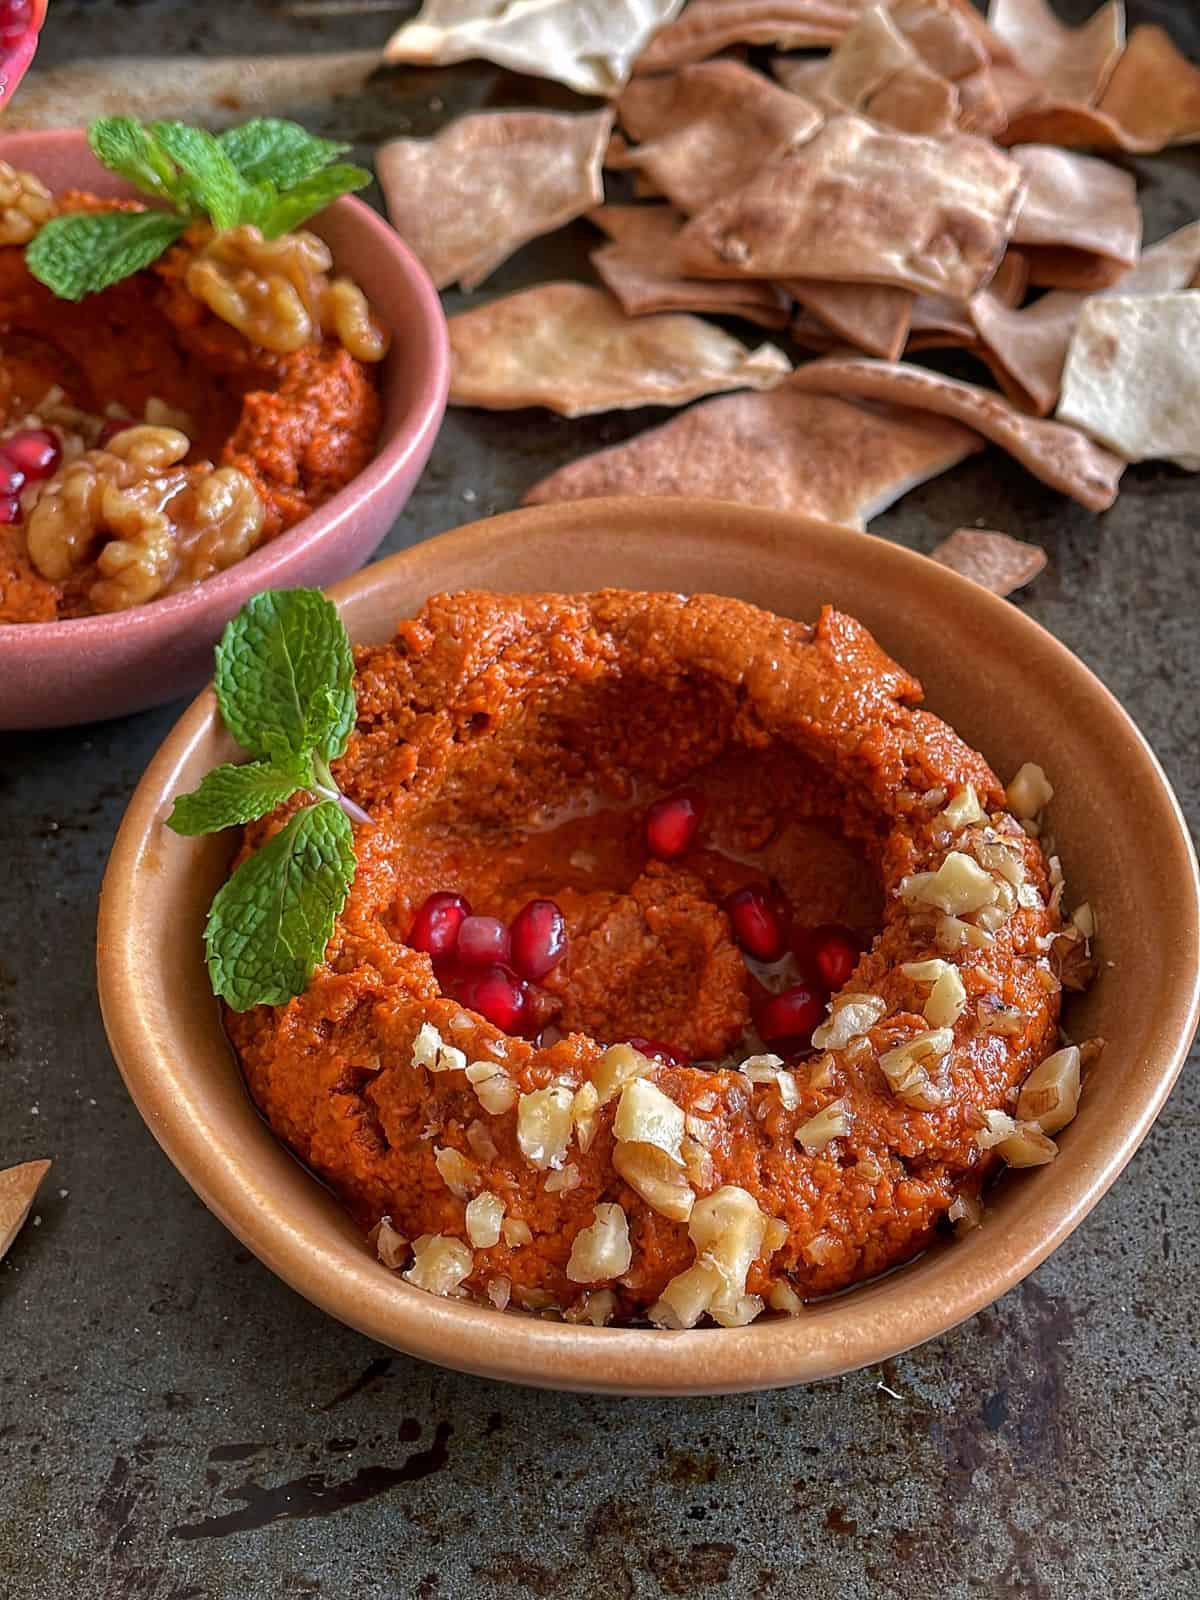 A bowl of mhammara dip garnished with walnuts and pomegranate.